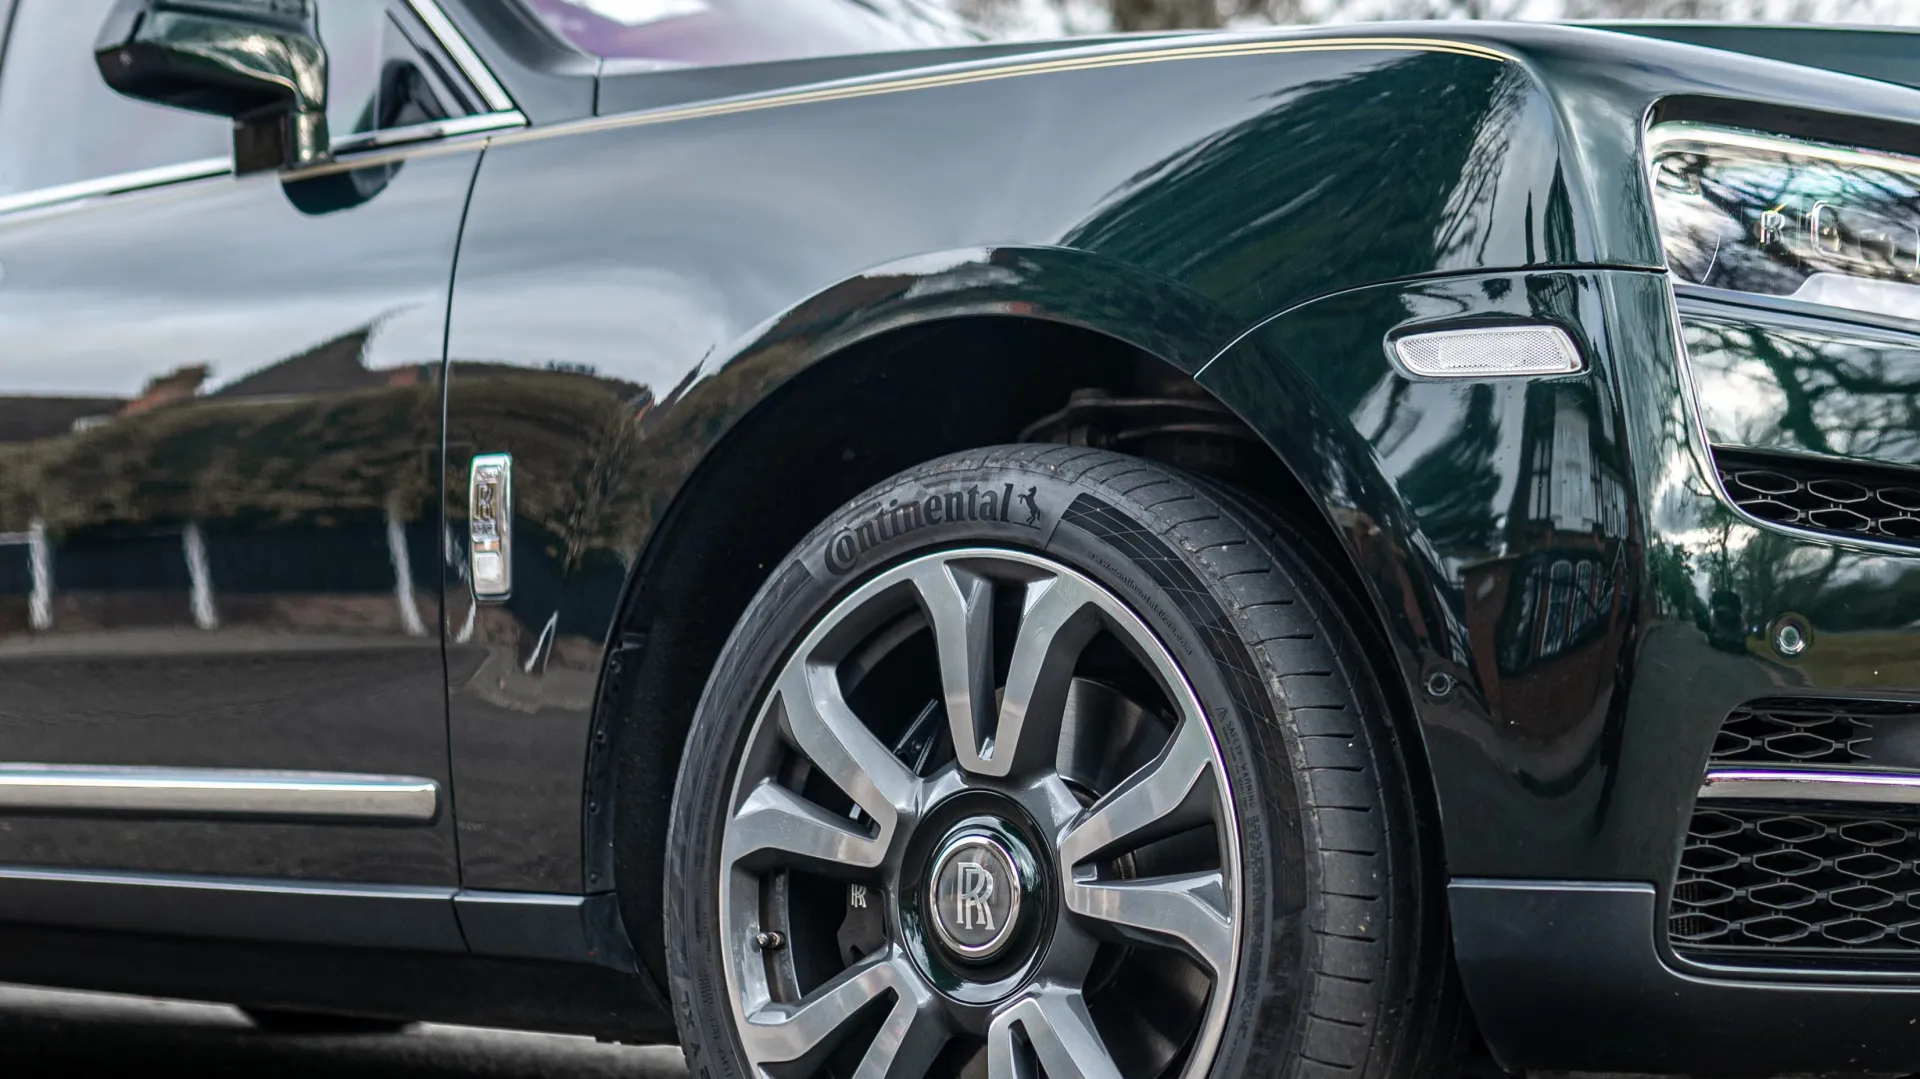 Close up photo showing the shade of Dark Green and Wheels on a Rolls-Royce Cullinan.